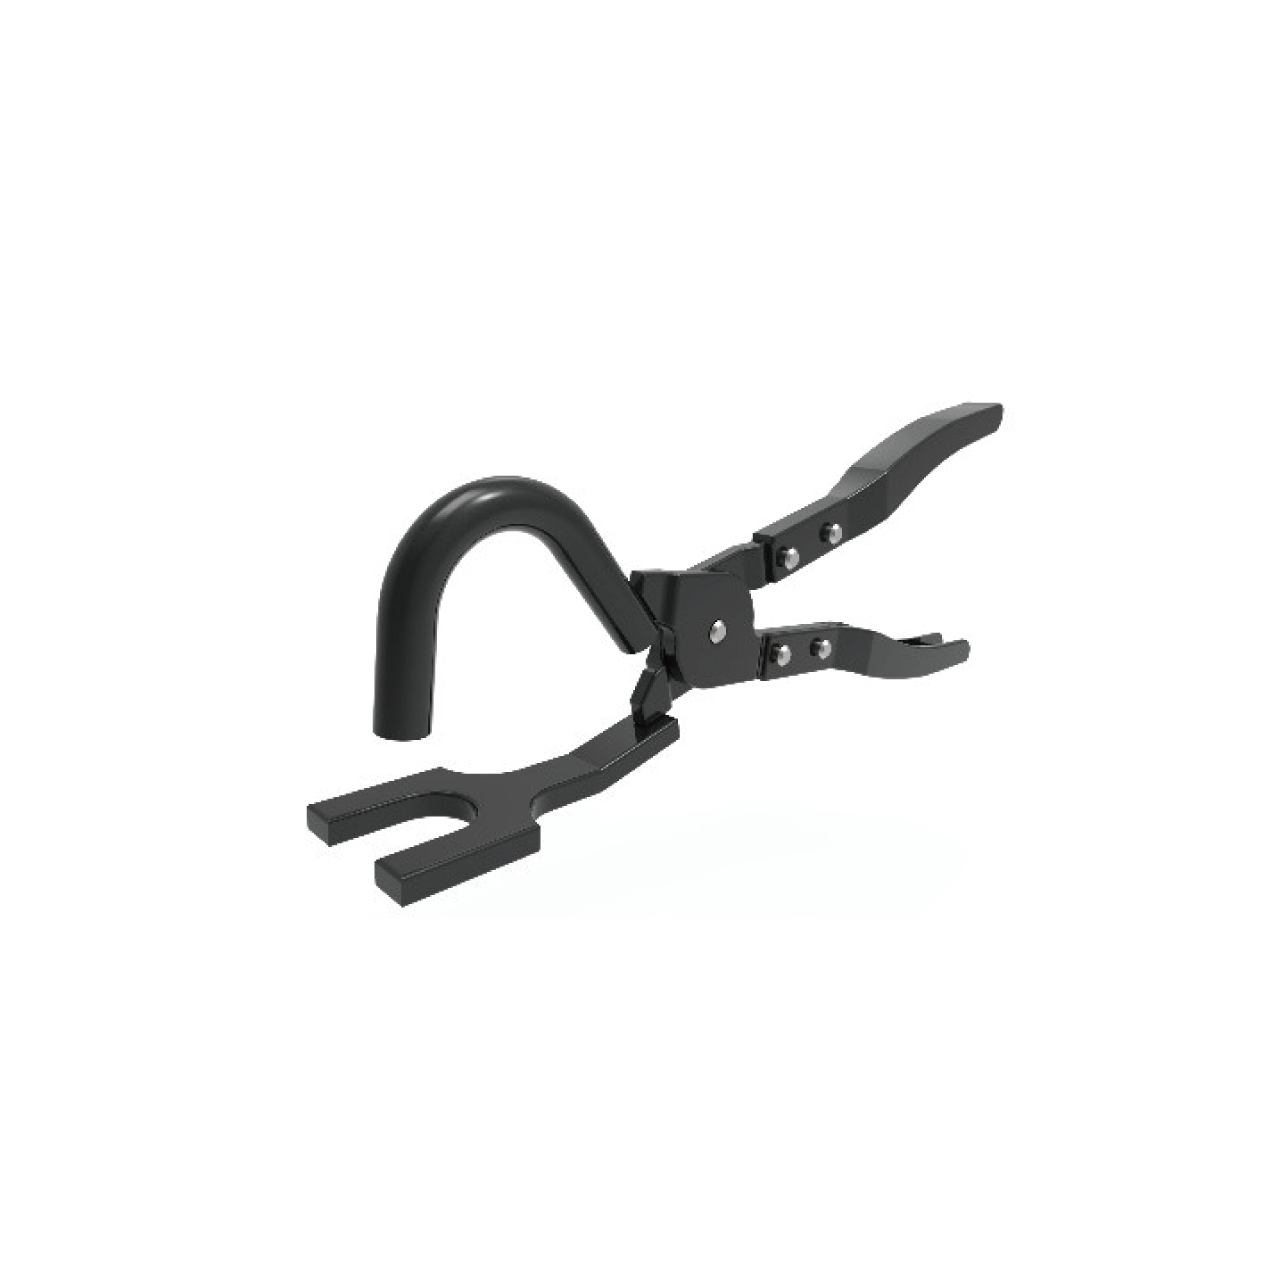 EXHAUST REMOVAL PLIERS